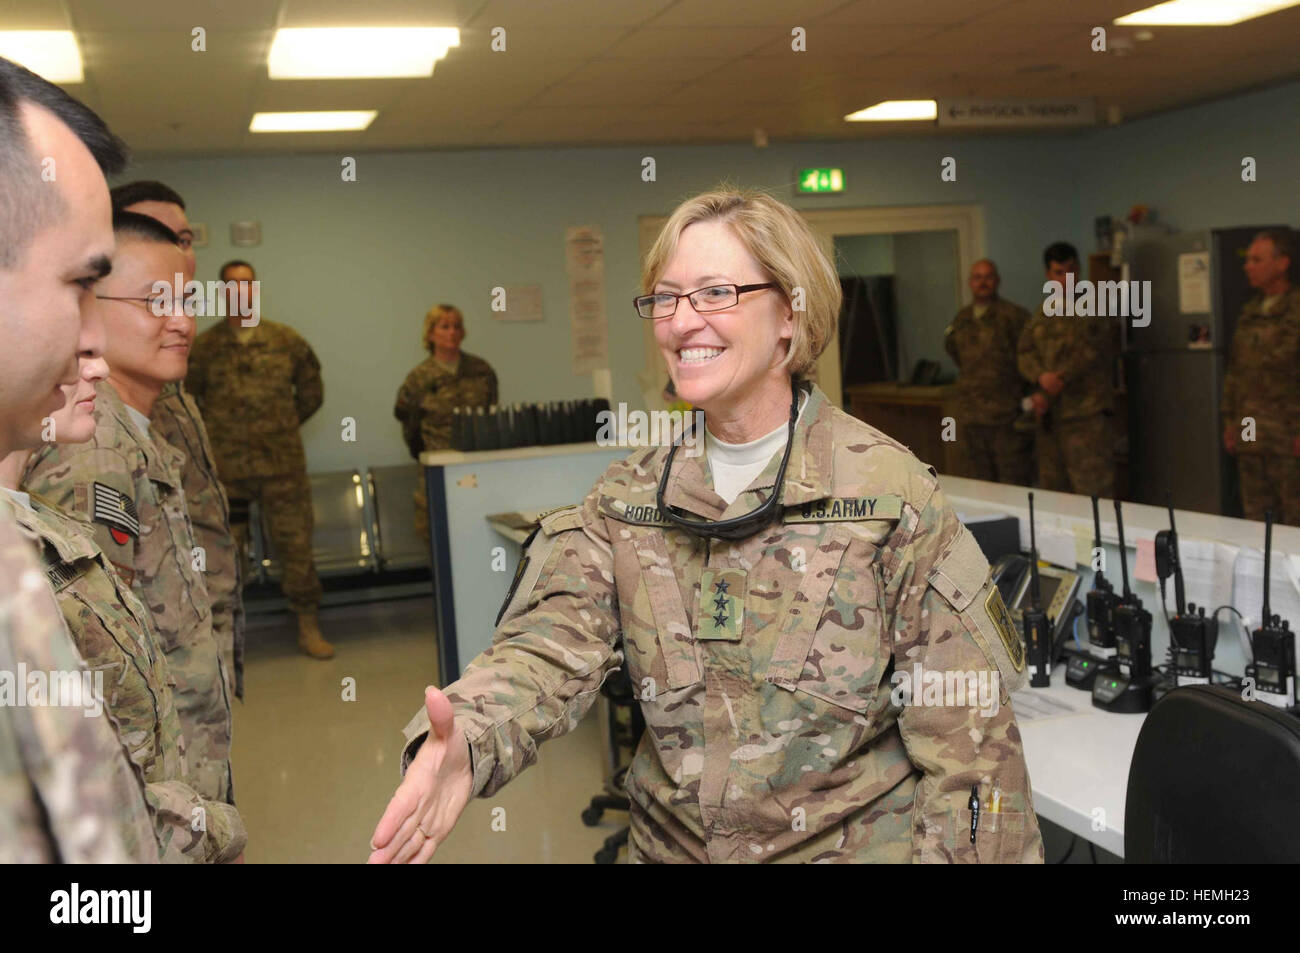 U.S. Army Lt. Gen. Patricia Horoho, center, the 43rd Army surgeon general, greets Service members at Kandahar Airfield's Role 3 hospital in Kandahar province, Afghanistan, April 18, 2013.  (U.S. Army photo by Sgt. Ashley Bell/Released) Service Surgeon Generals visit RC-South 130418-A-VM825-060 Stock Photo